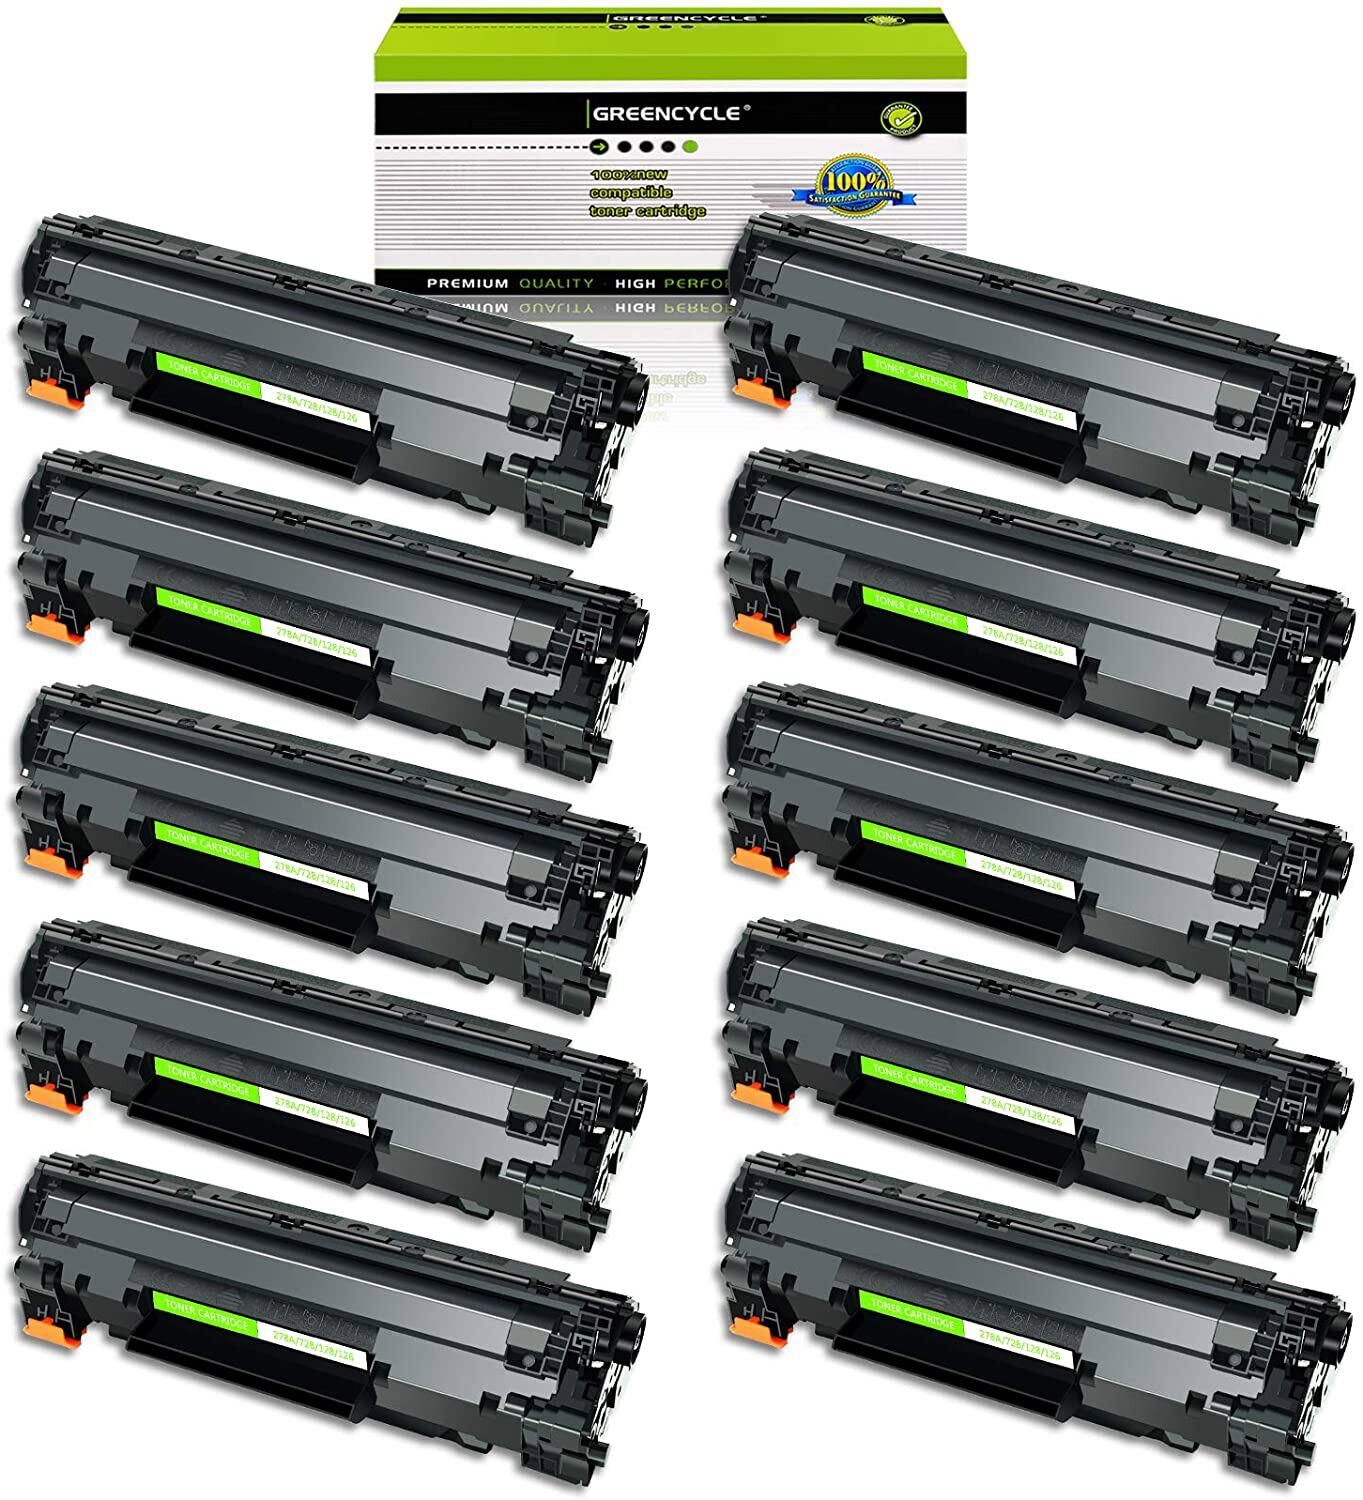 GREENCYCLE 10PK CE278A 78A Toner Cartridge Fits For HP LaserJet P1606dn M1536dnf